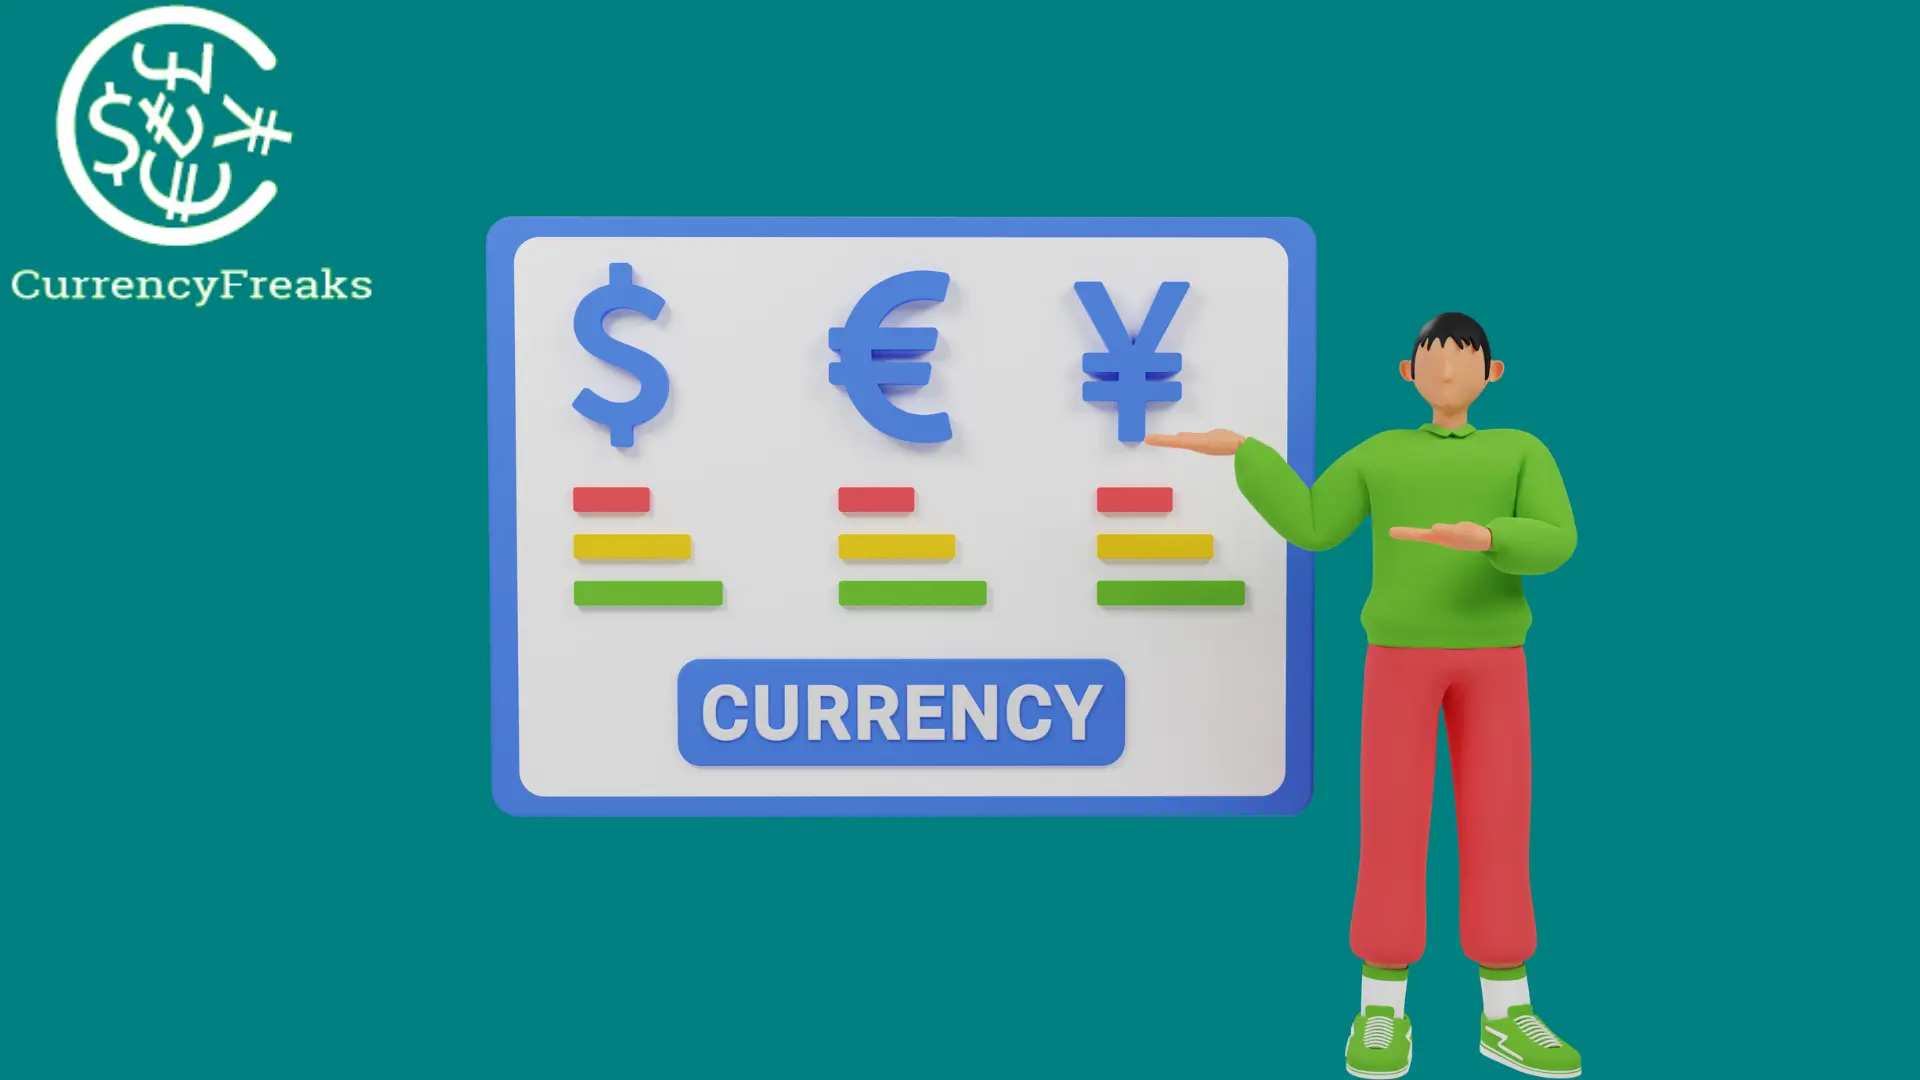 Comparison of different currencies